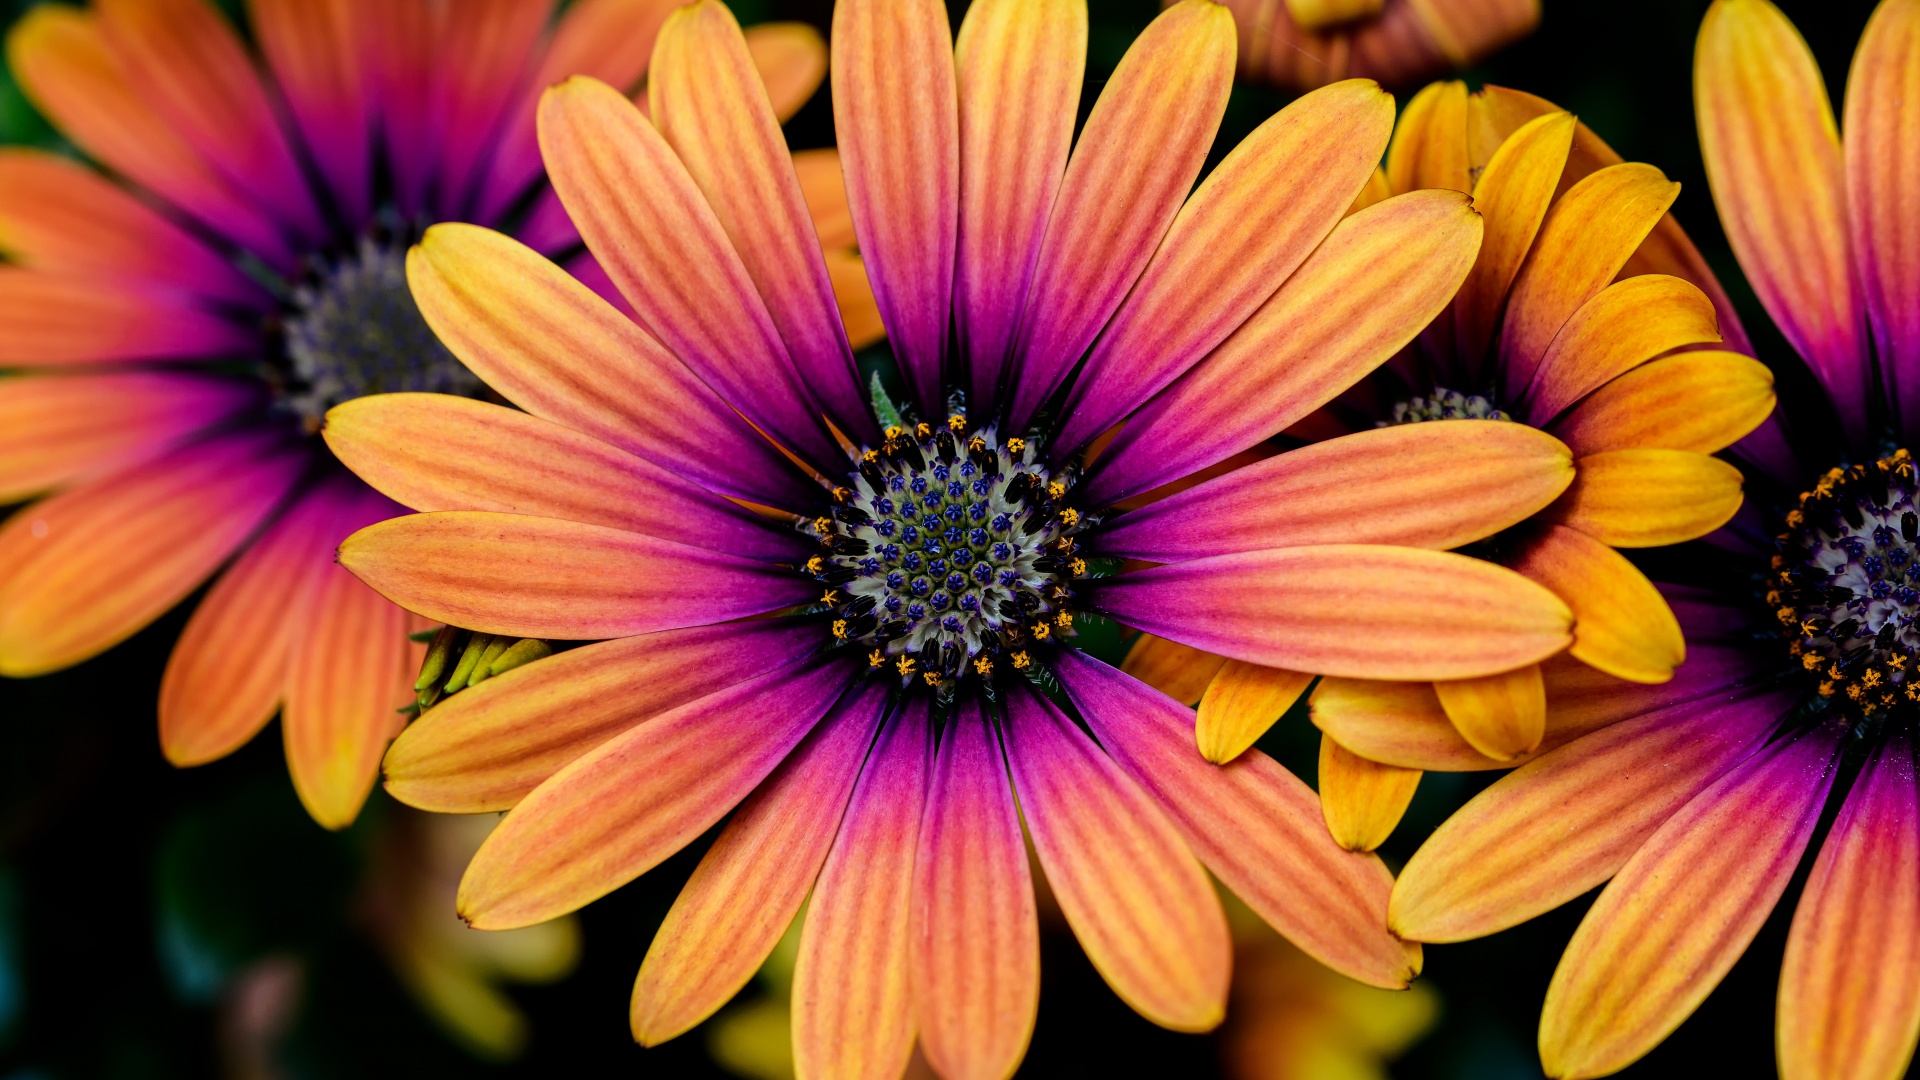 Daisy flowers 4K Wallpaper, Colorful flowers, Yellow, Pink, Closeup